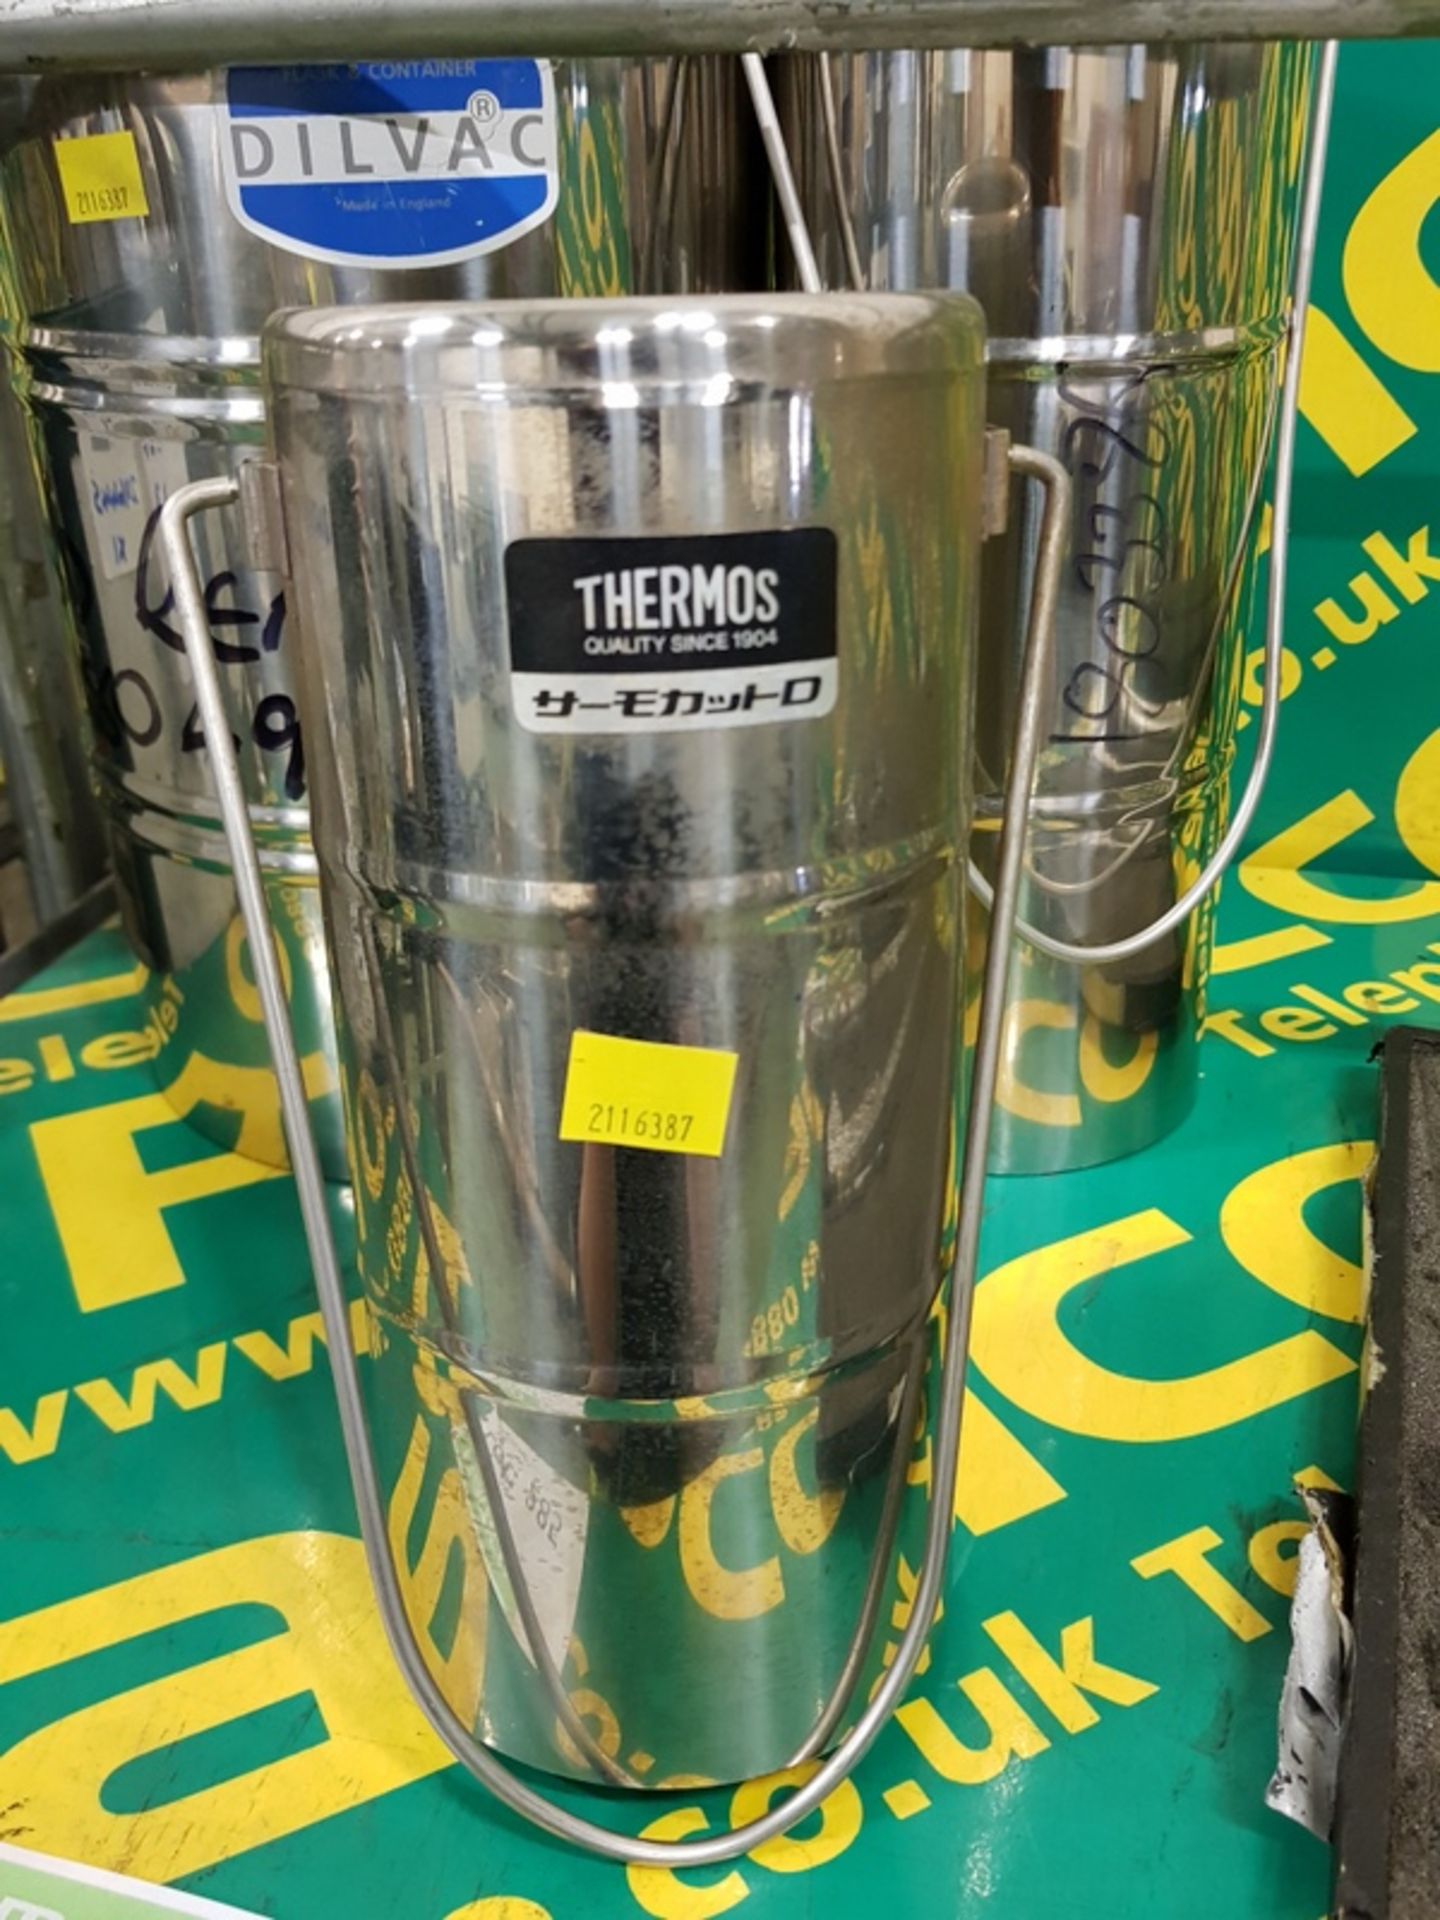 3x Thermos Carrying Containers - Image 2 of 3